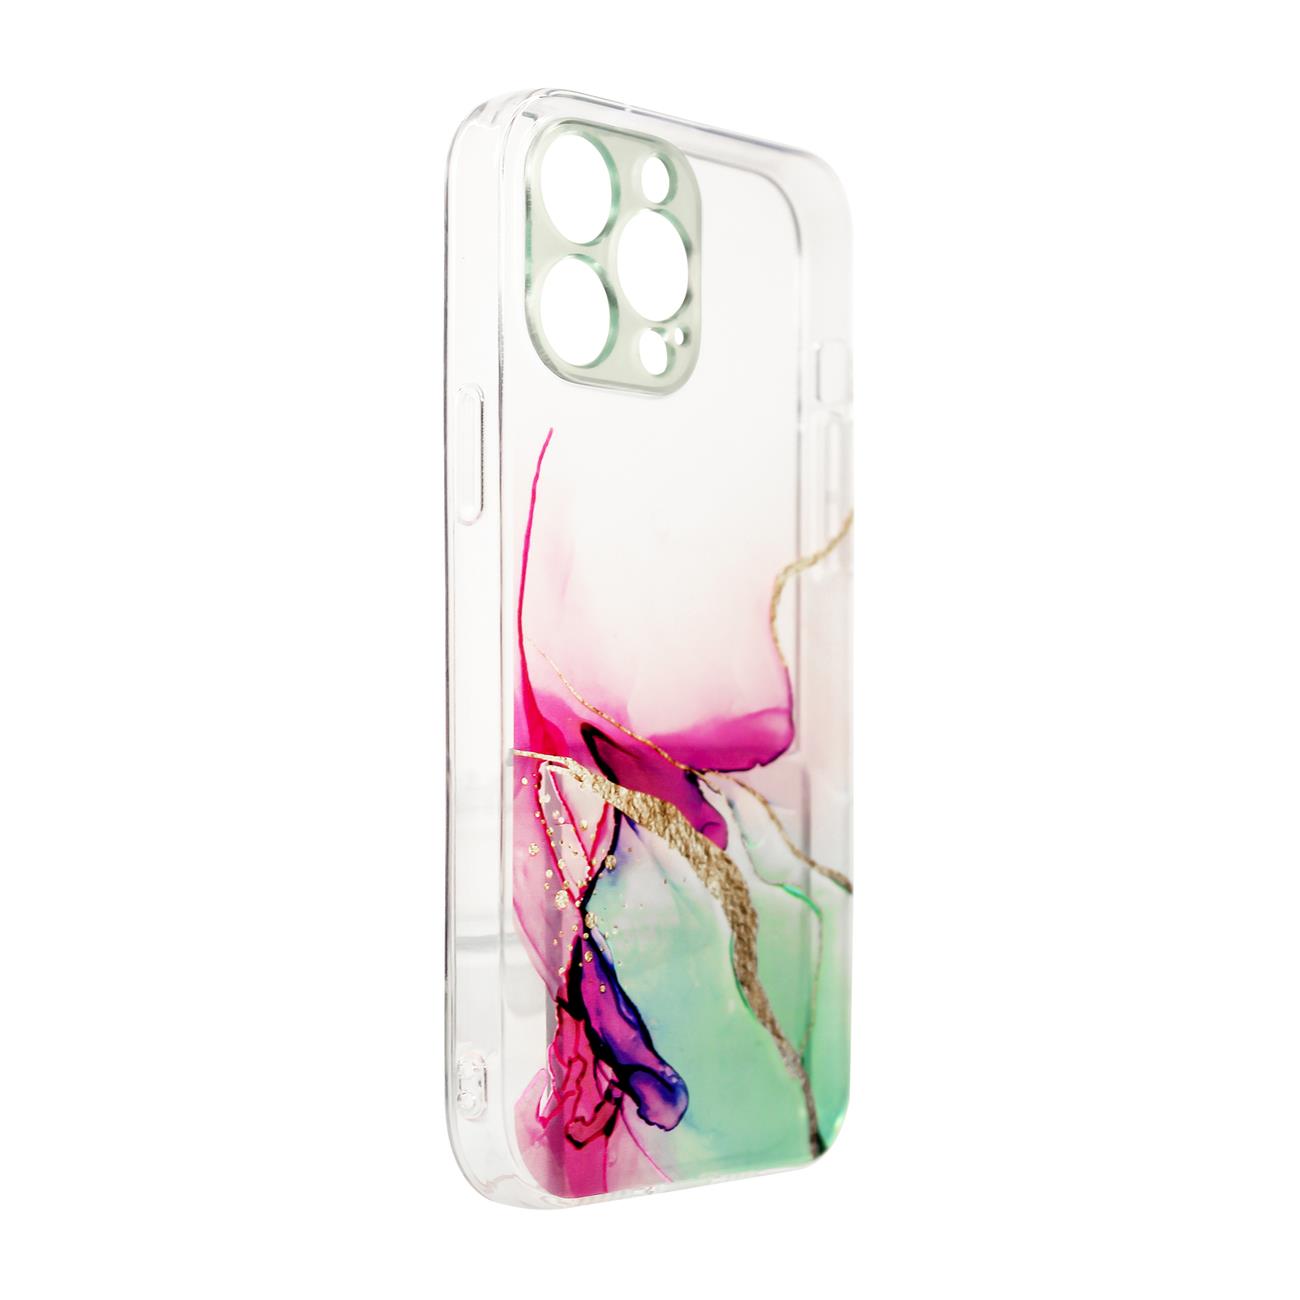 Pokrowiec Marble Case mitowy Apple iPhone 12 Pro / 2